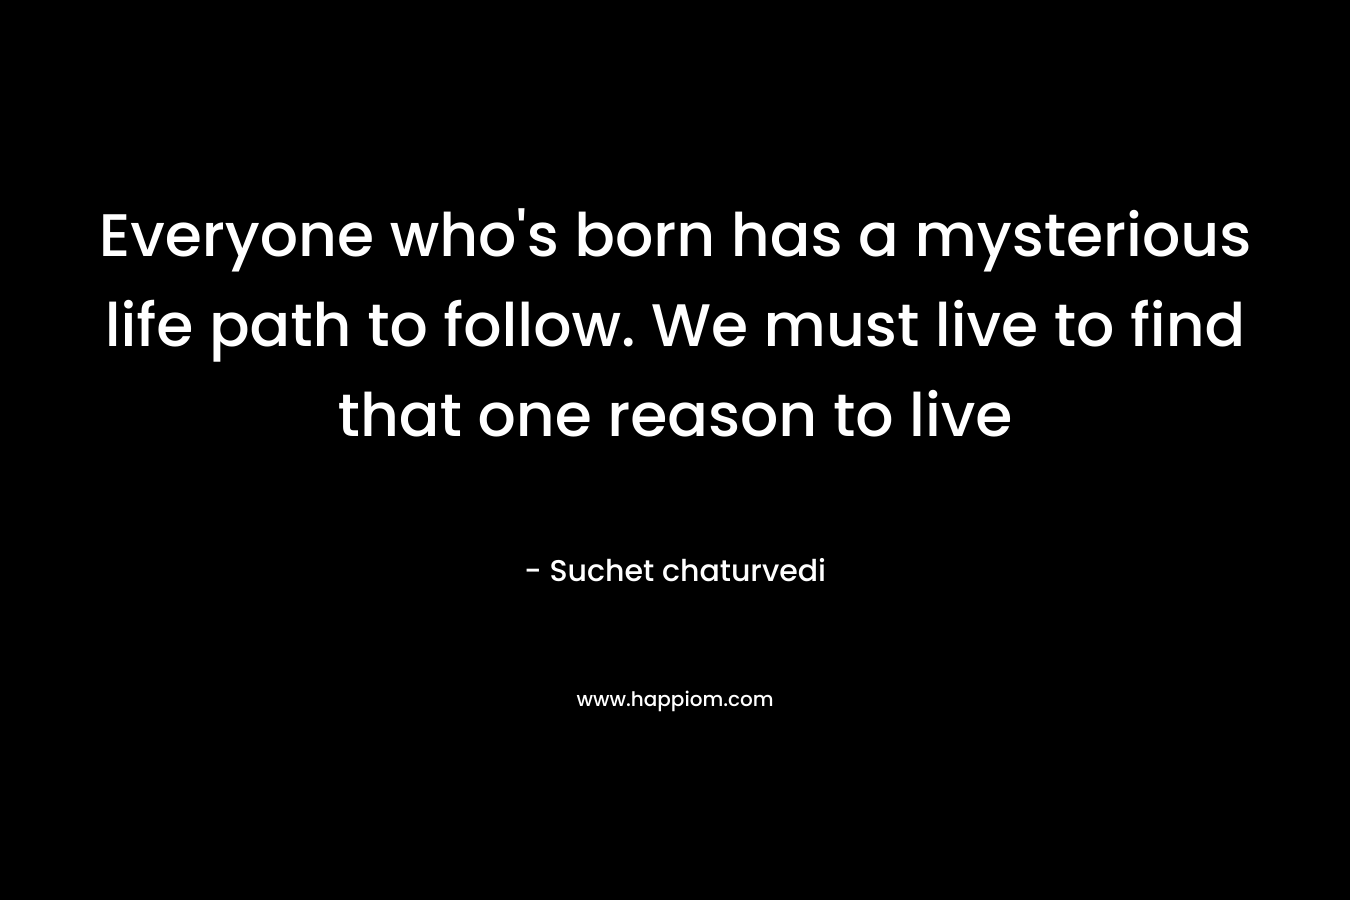 Everyone who’s born has a mysterious life path to follow. We must live to find that one reason to live – Suchet chaturvedi